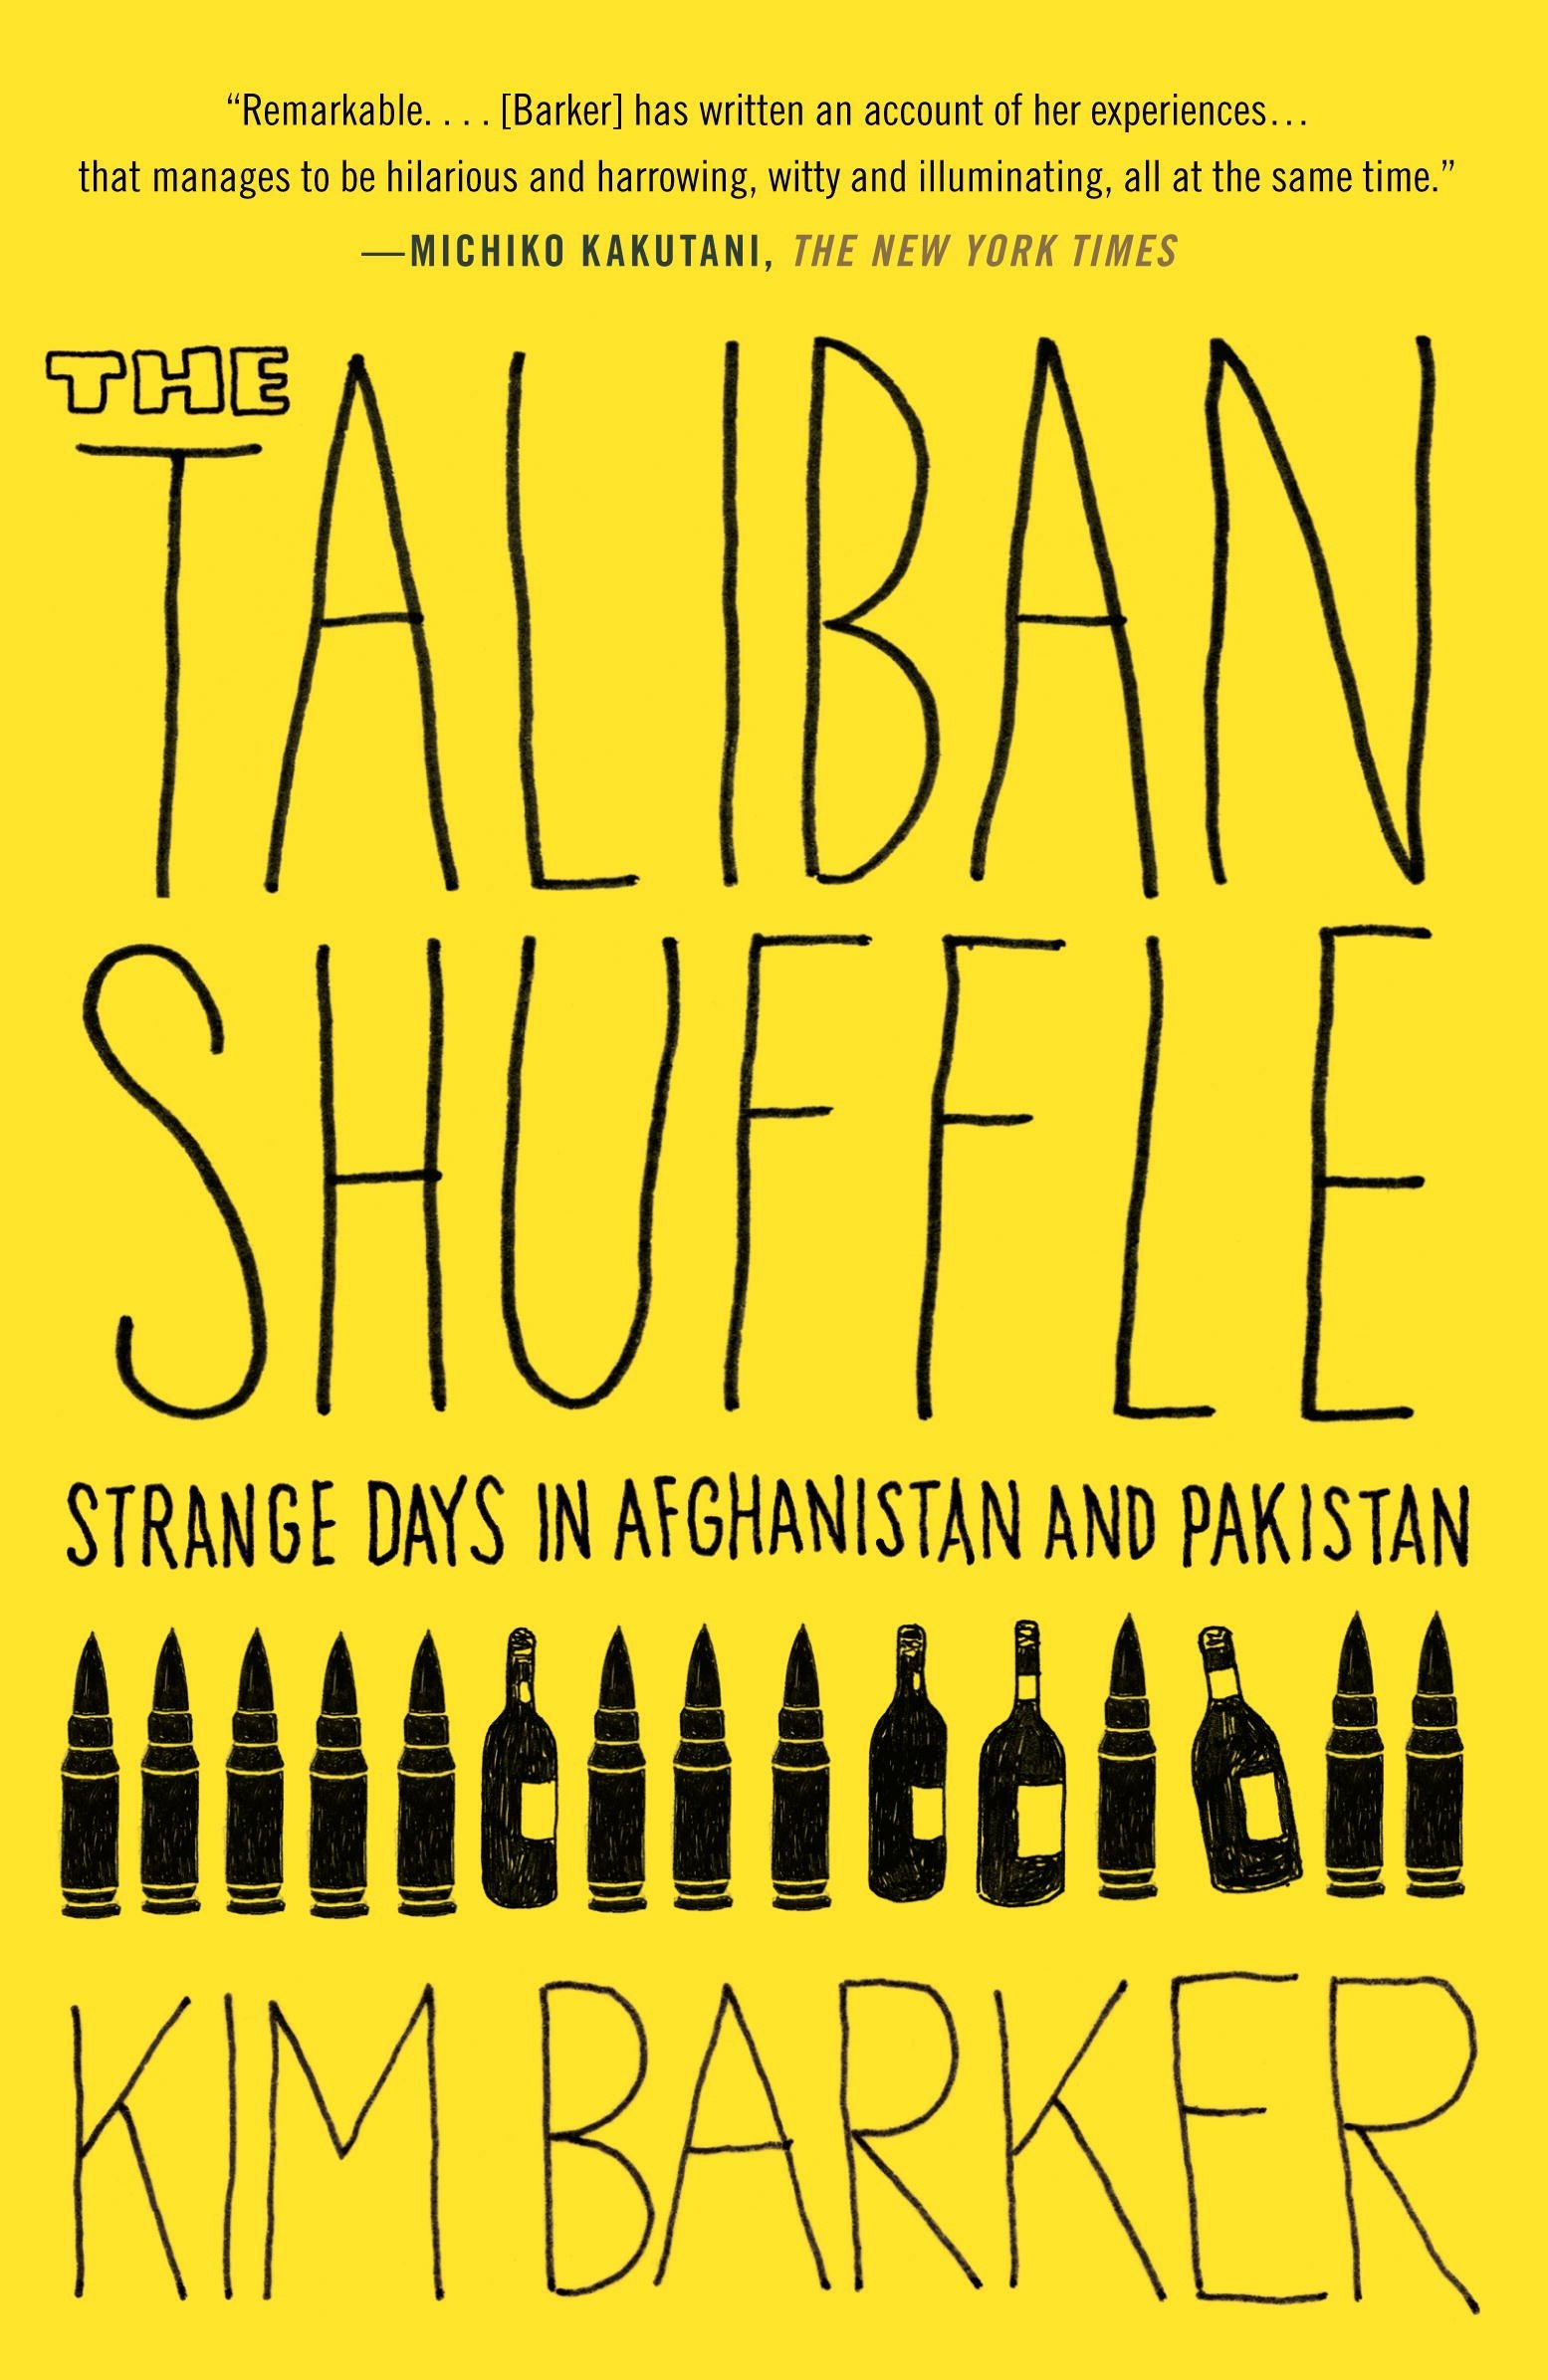 Umschlagbild für The Taliban Shuffle [electronic resource] : Strange Days in Afghanistan and Pakistan